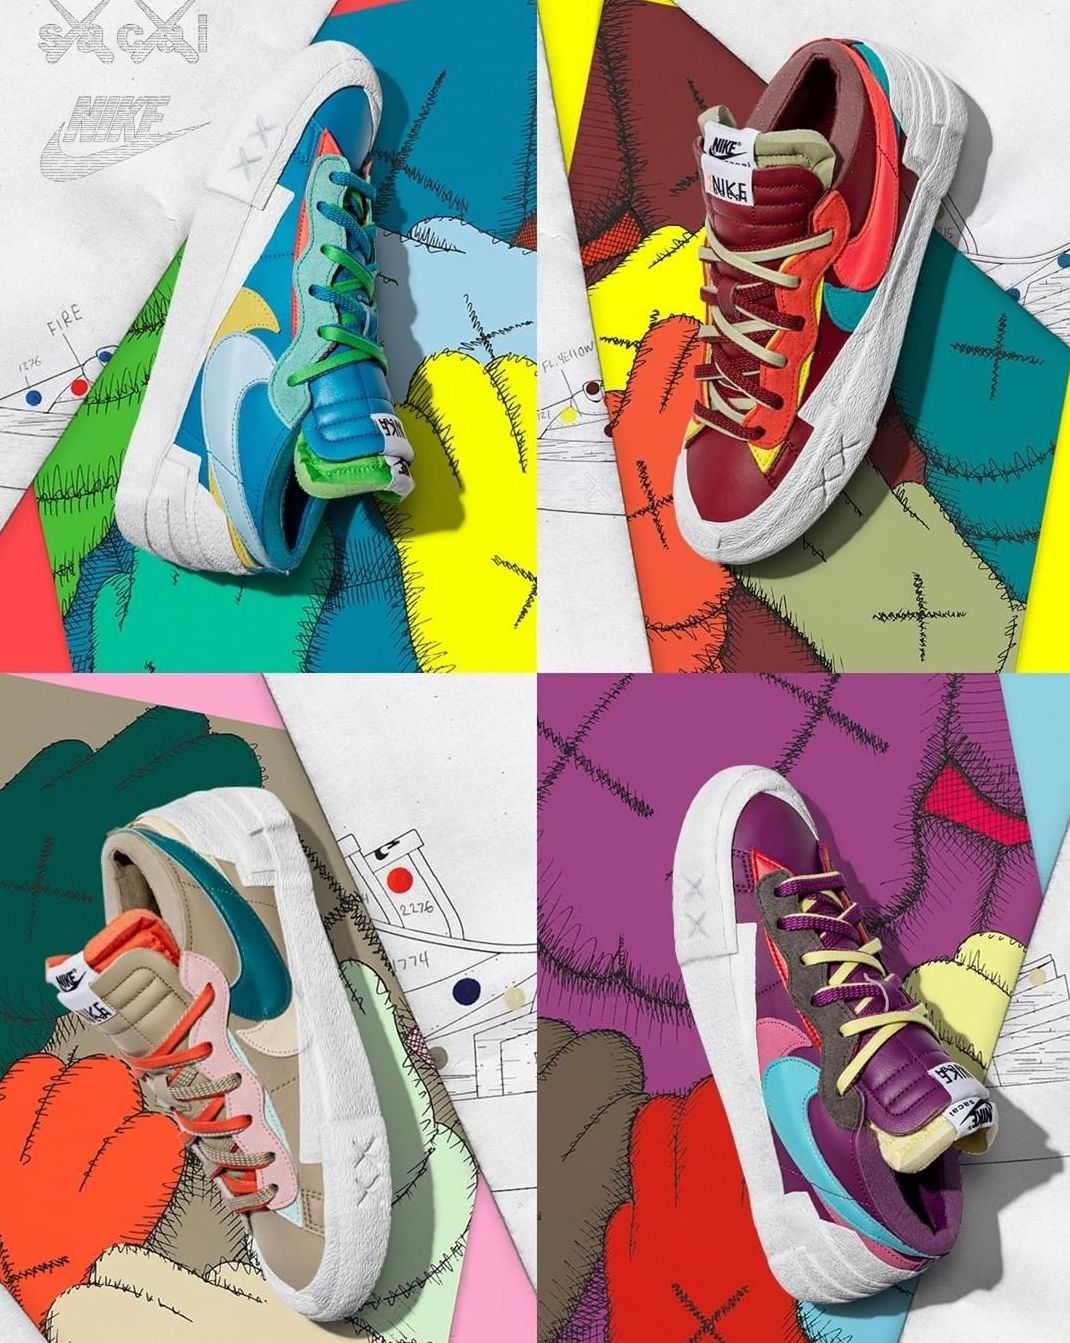 Sacai Is Releasing a Nike Blazer Collab With Kaws | Complex